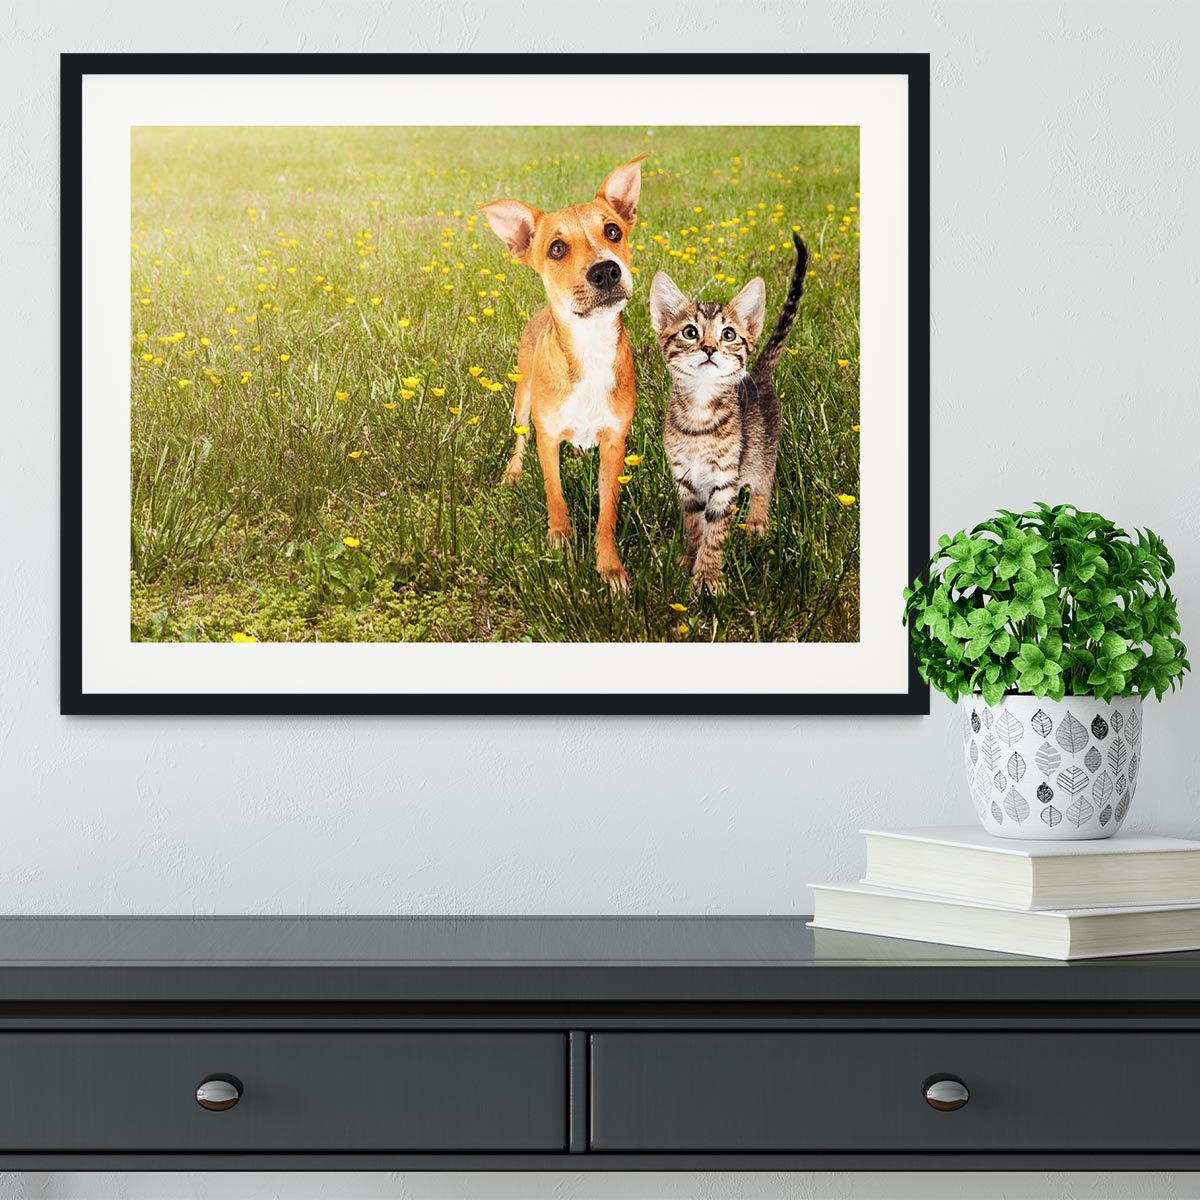 Cute kitten and puppy together in a field Framed Print - Canvas Art Rocks - 1